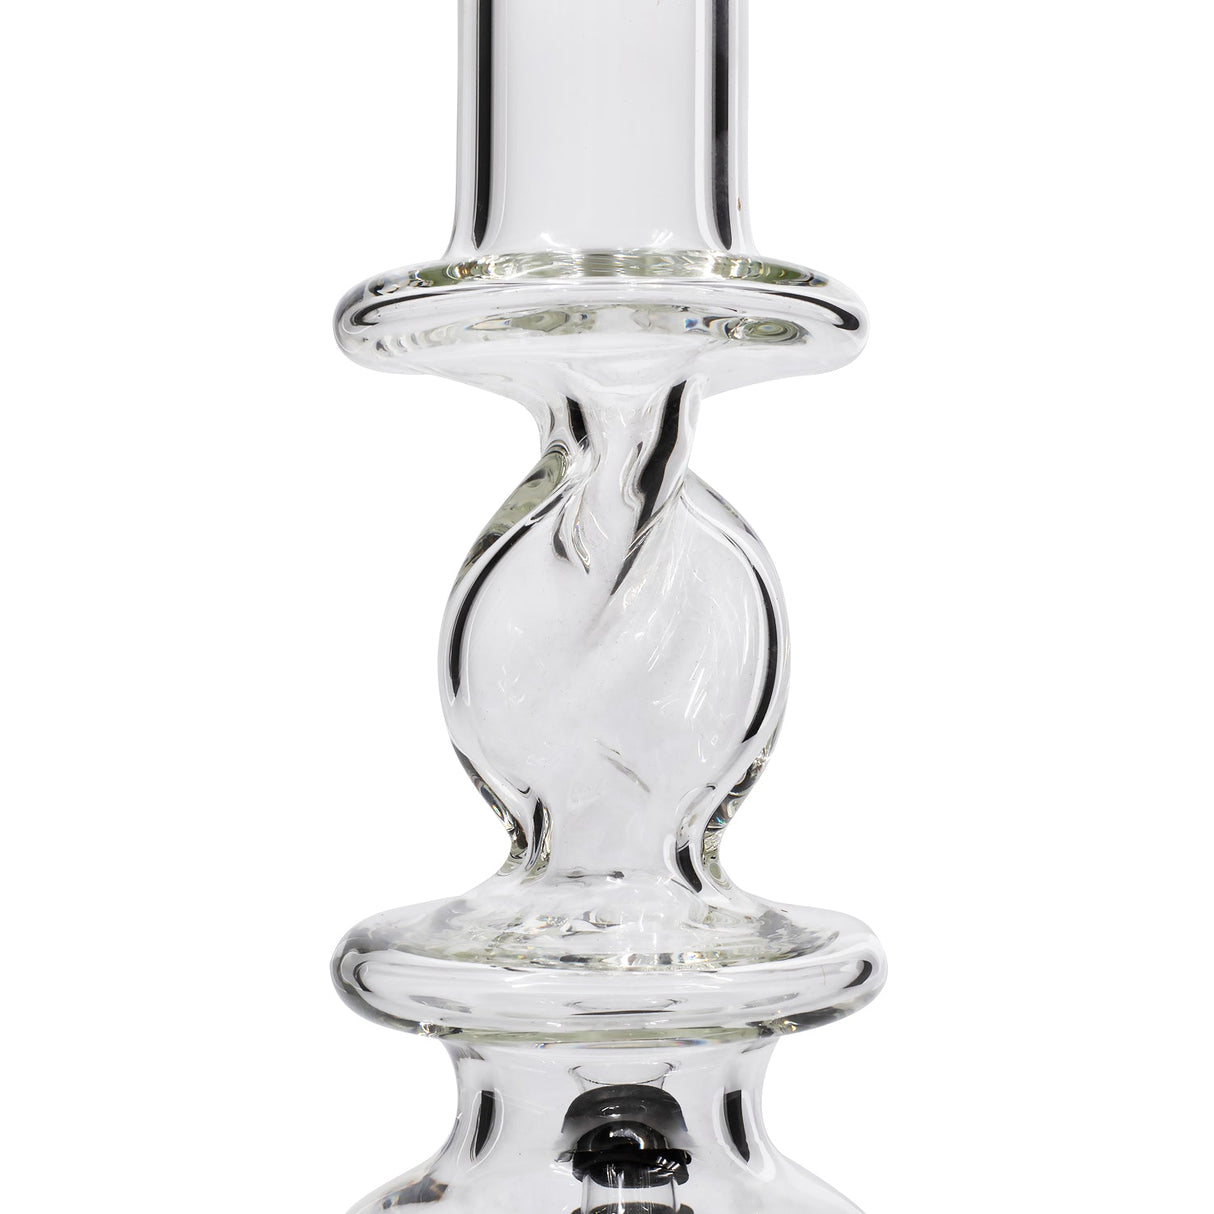 LA Pipes "The Typhoon Twister" Glass Bong close-up, showcasing its bubble design and grommet joint.